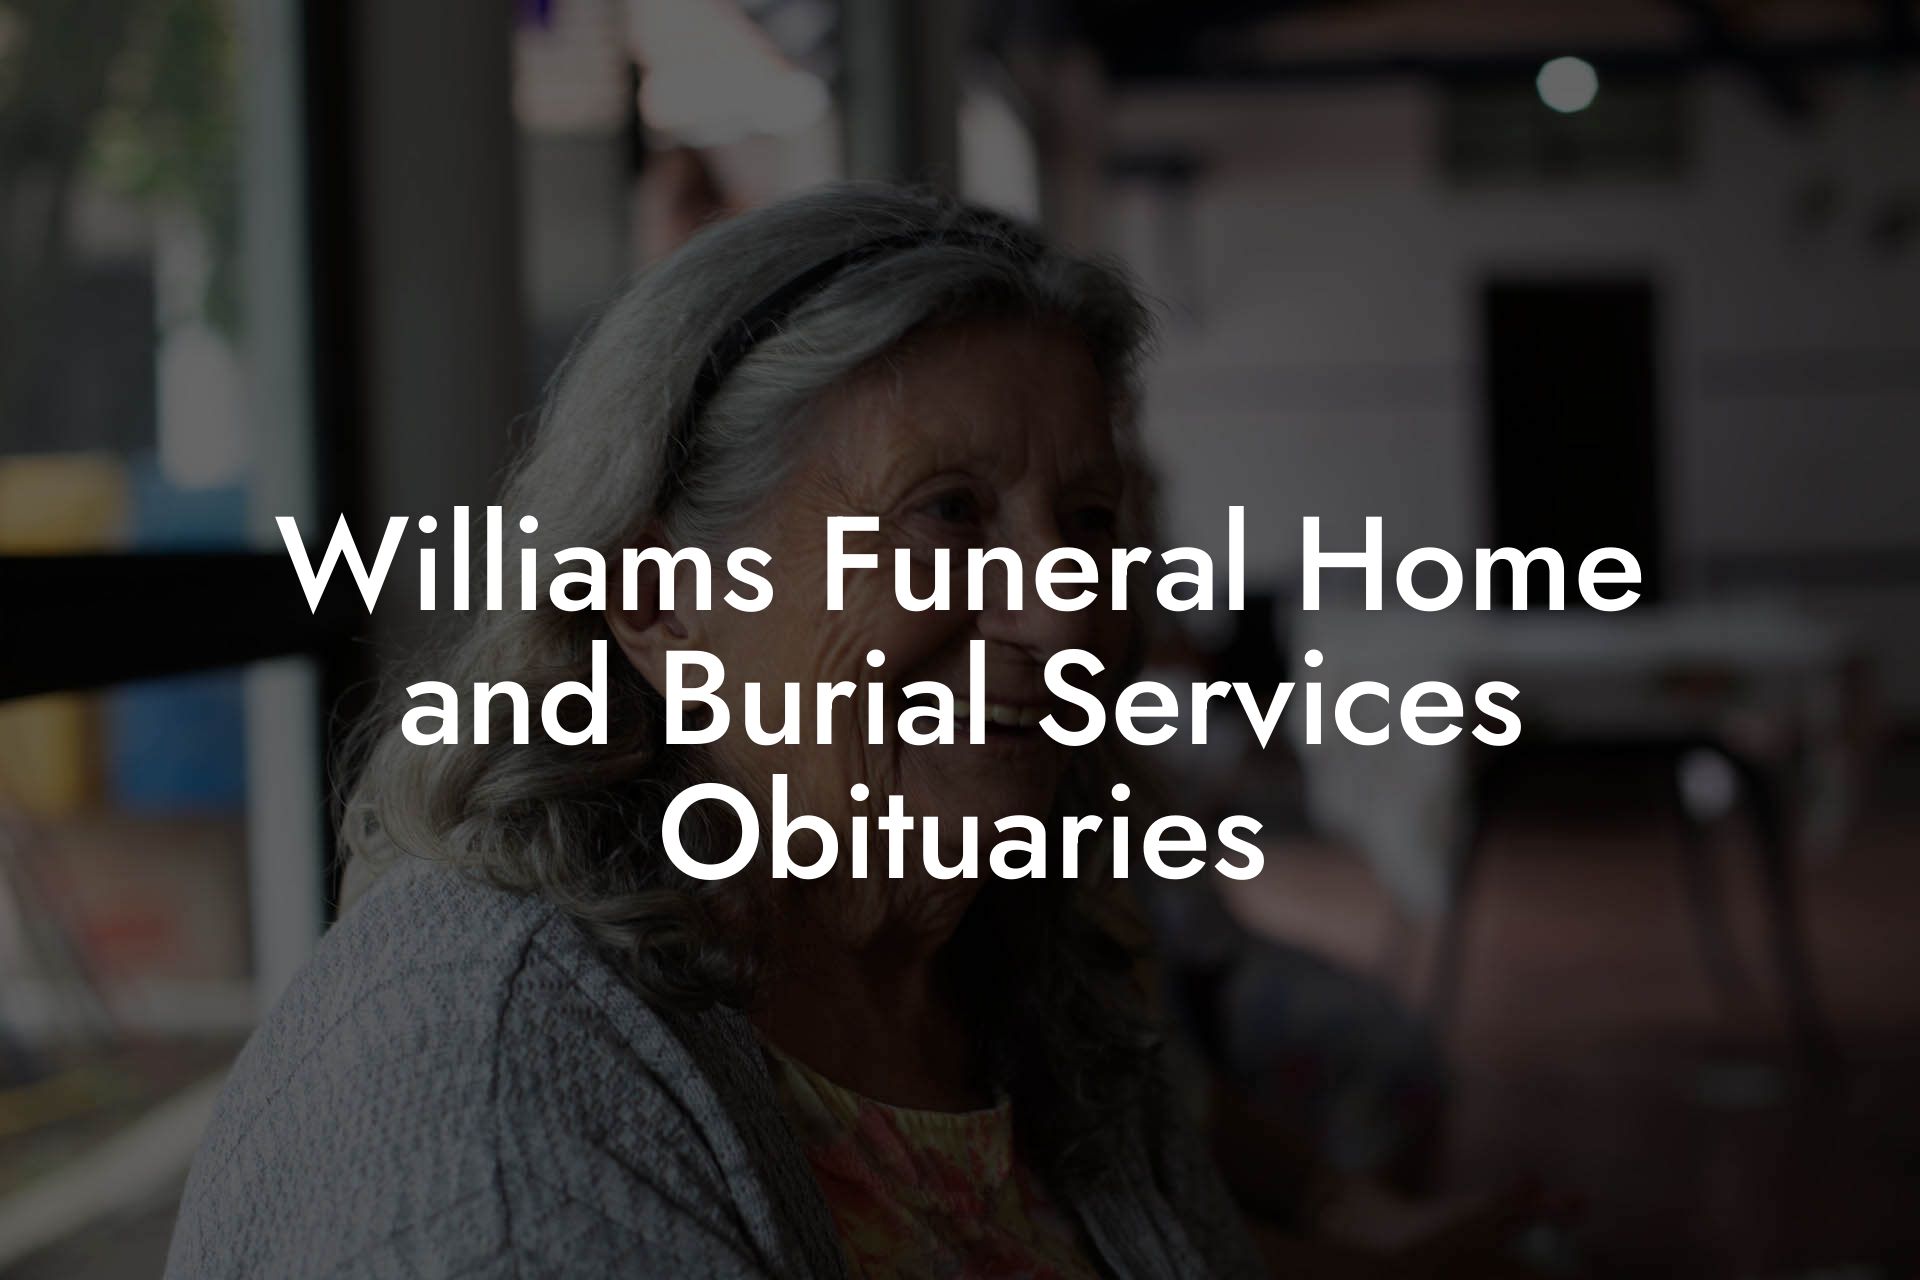 Williams Funeral Home and Burial Services Obituaries